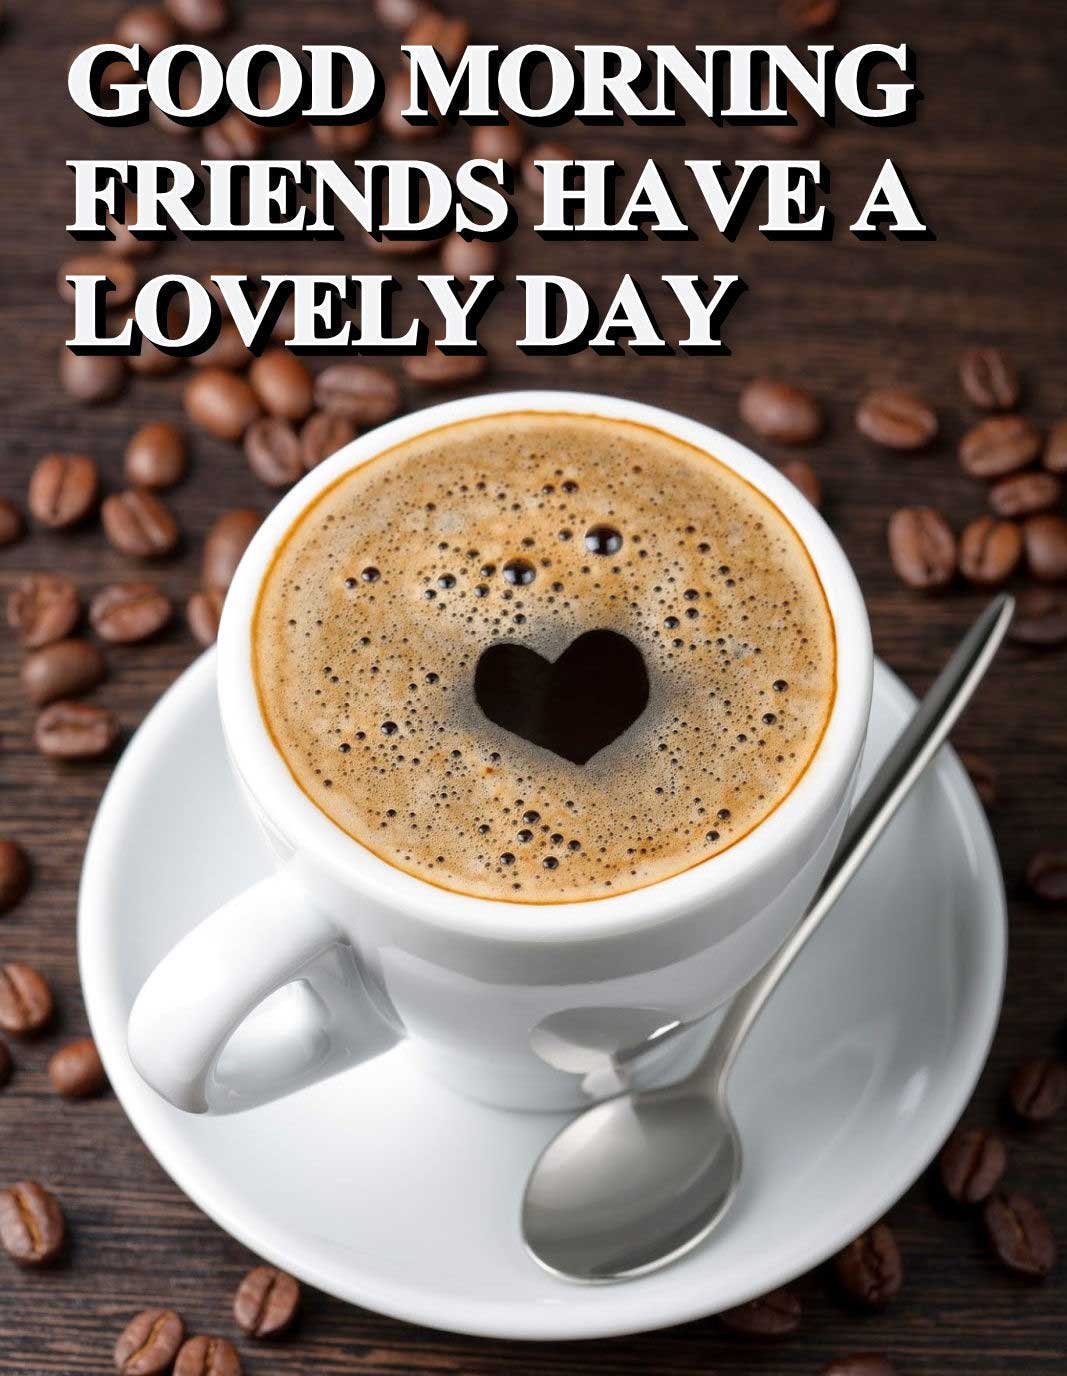 Good Morning Messages For Friends With Pictures